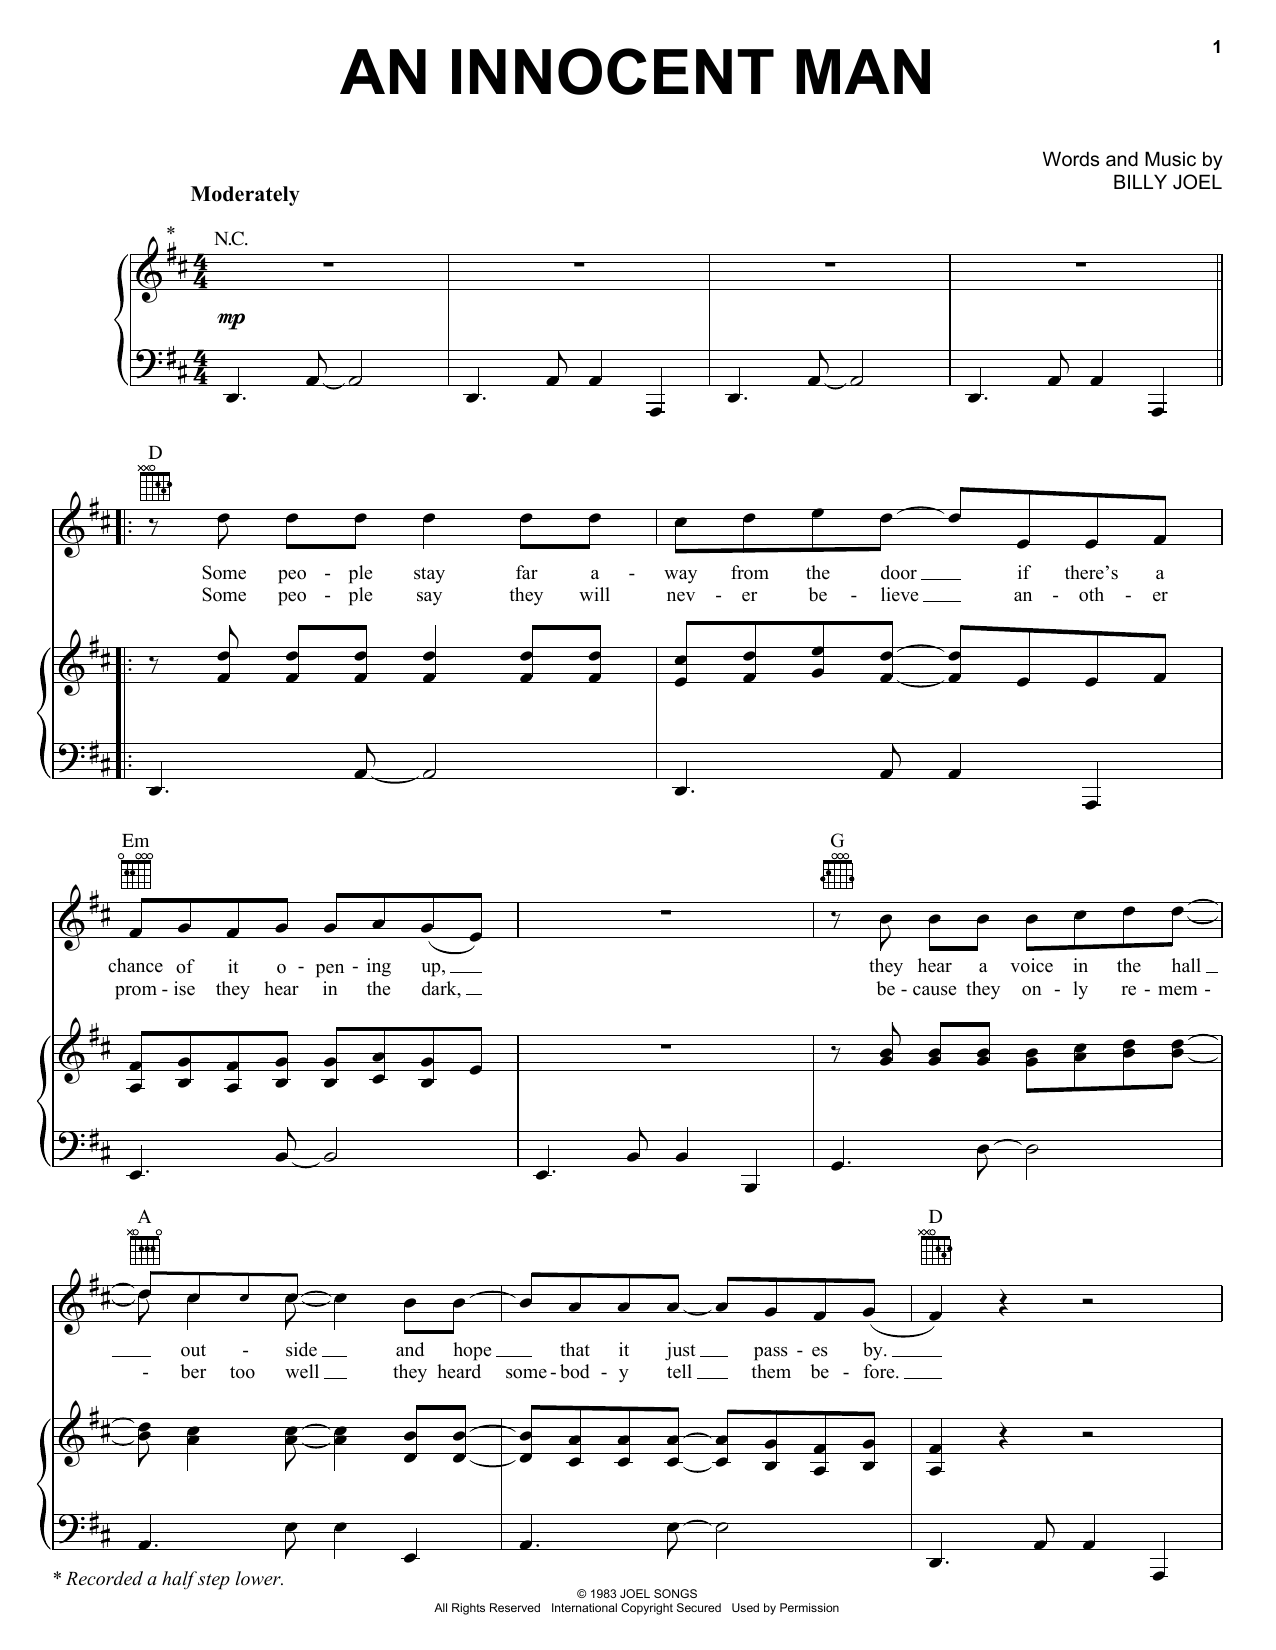 Billy Joel An Innocent Man sheet music notes and chords. Download Printable PDF.